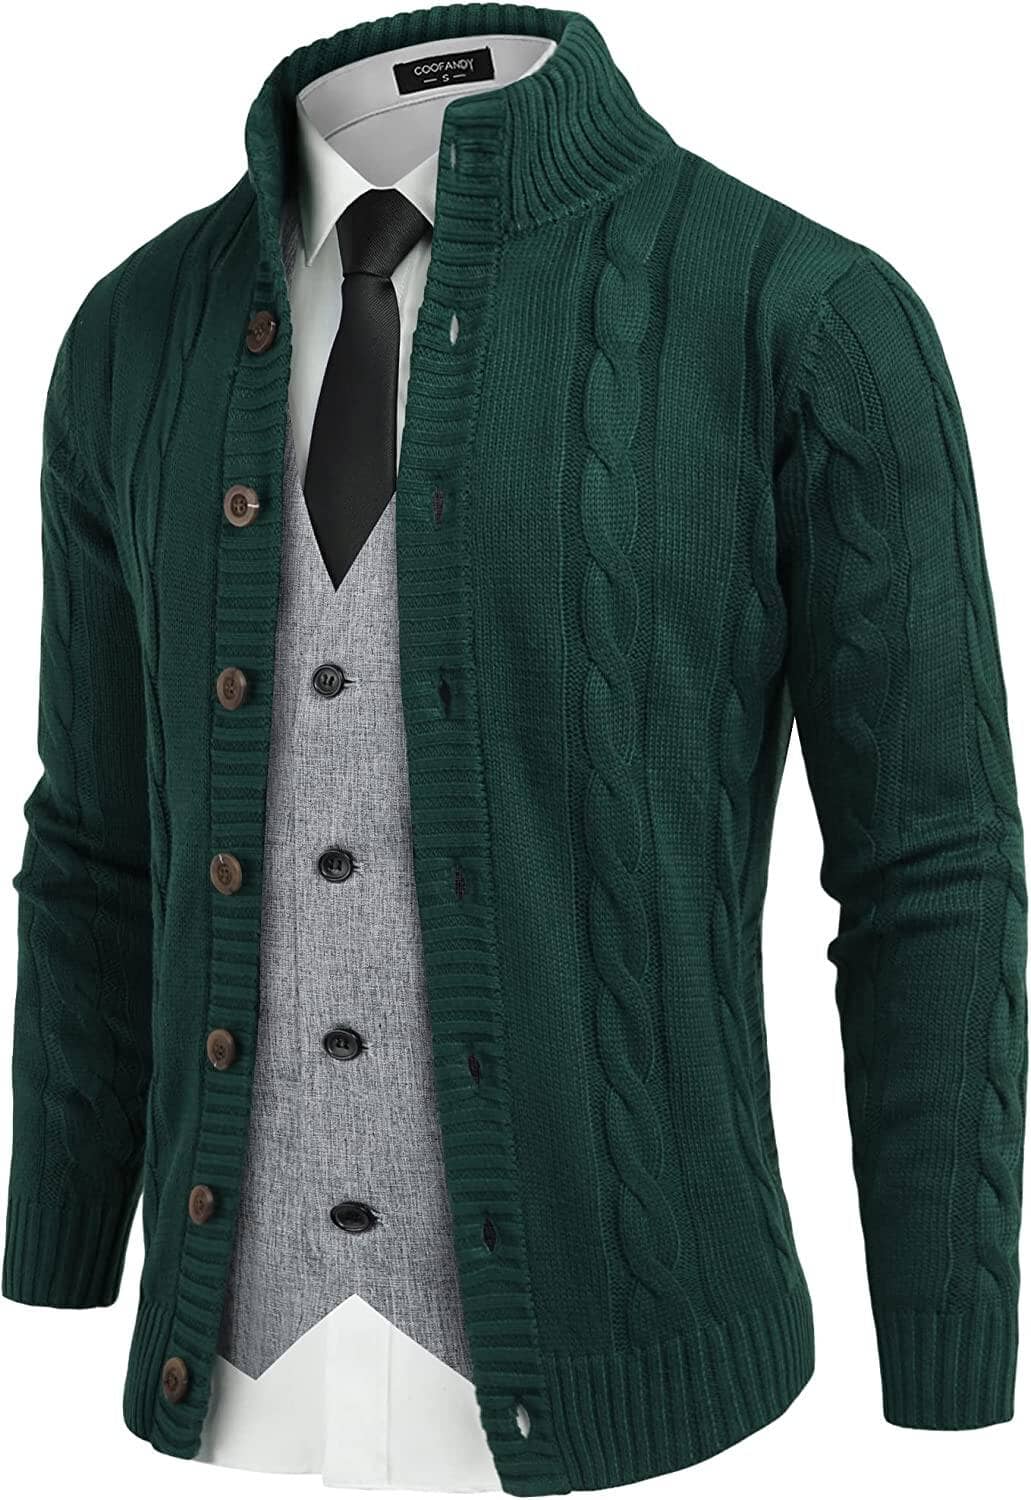 Coofandy Cardigan Cable Knitted Button Down Sweater (US Only) Sweaters COOFANDY Store Green S 